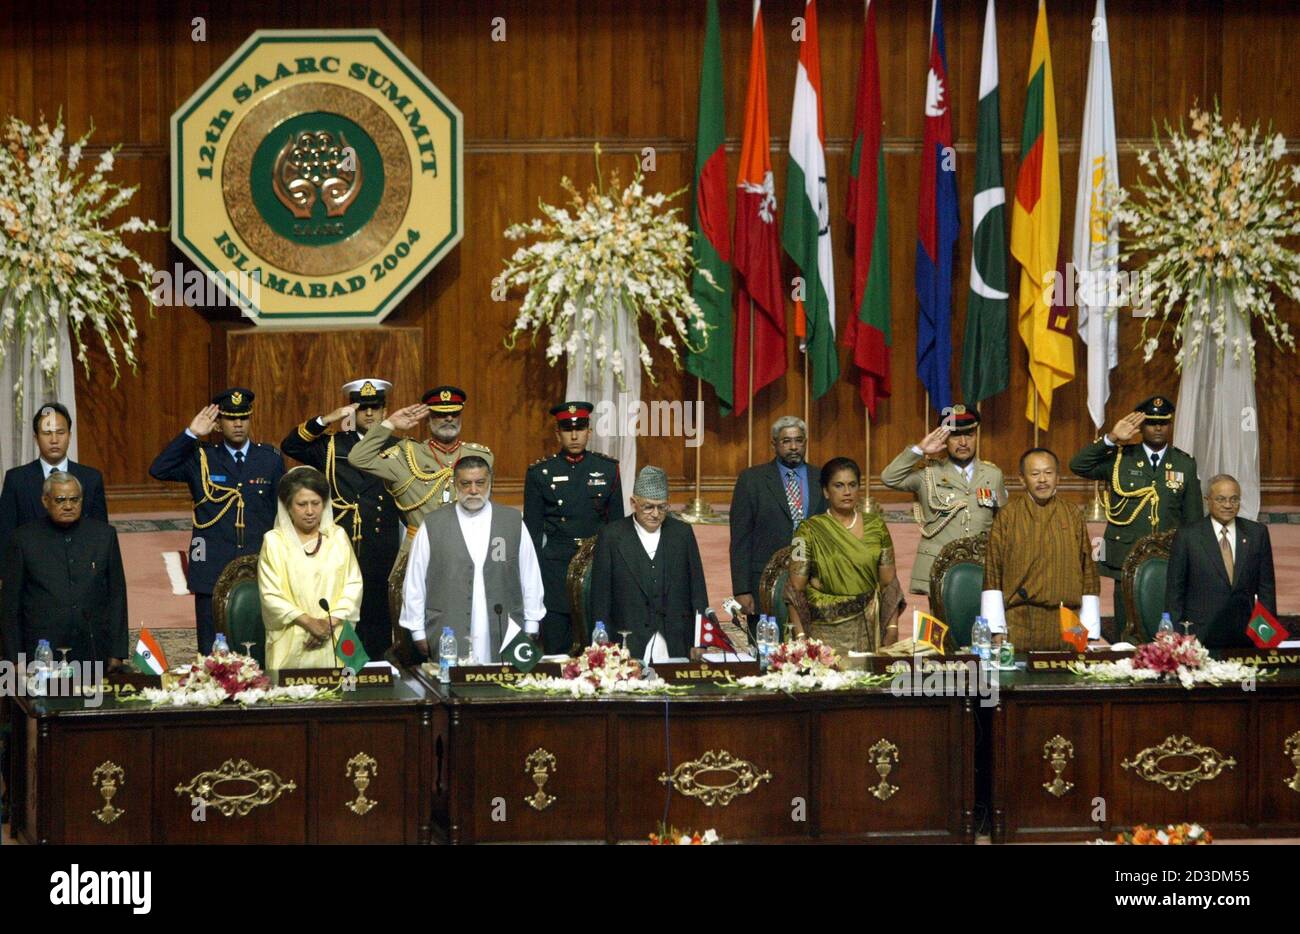 LEADERS OF SAARC MEMBER COUNTRIES STAND FOR PAKISTAN NATIONAL ANTHEM DURING  OPENING CEREMONIES IN ISLAMABAD. Leaders from the South Asian Association  for Regional Cooperation (SAARC) member countries stand for Pakistan's  national anthem